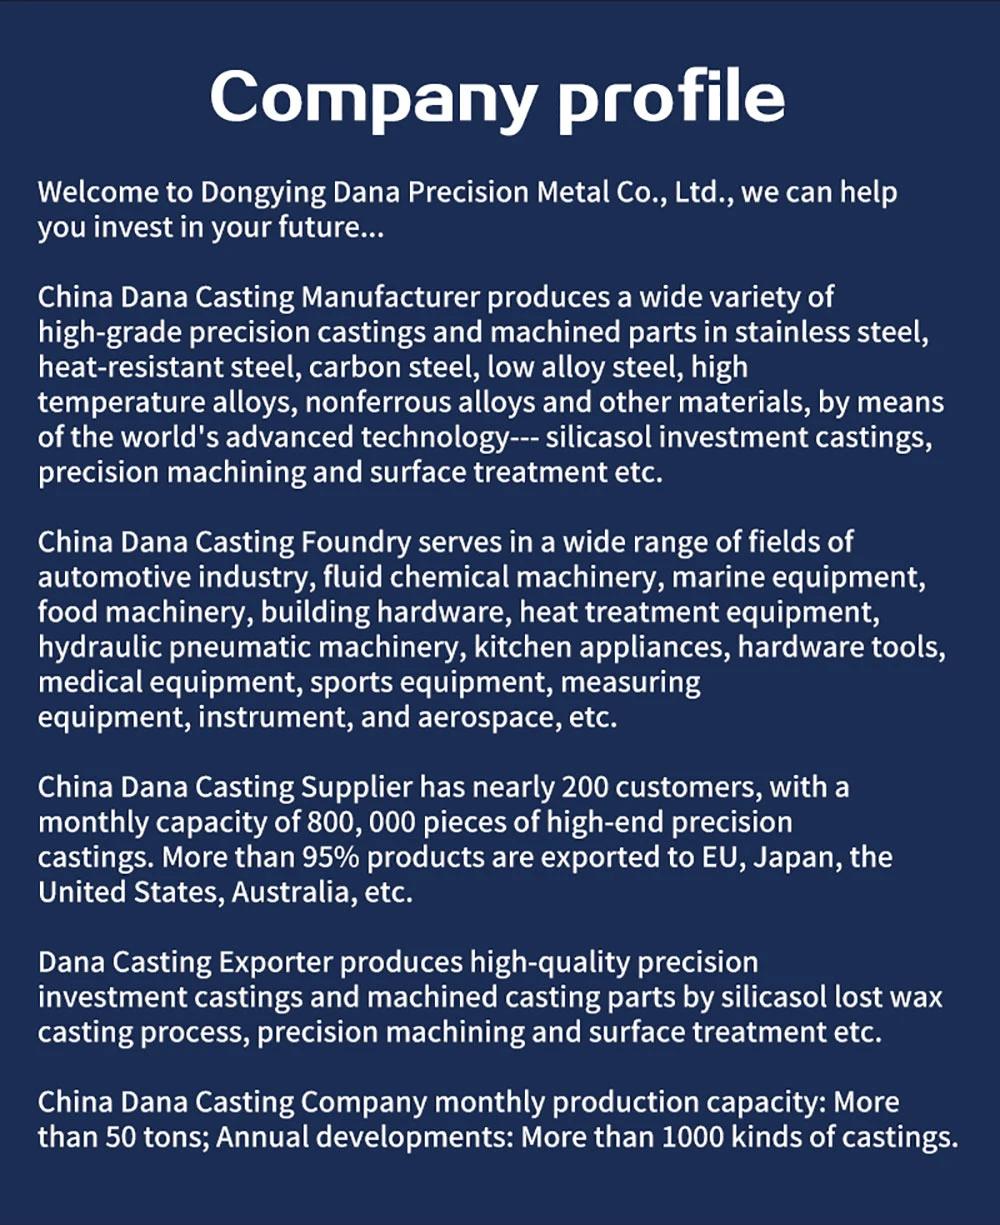 Die Casting/ Investment Casting/ Cast/ Machining/ Lost Wax Casting/ Precision Casting